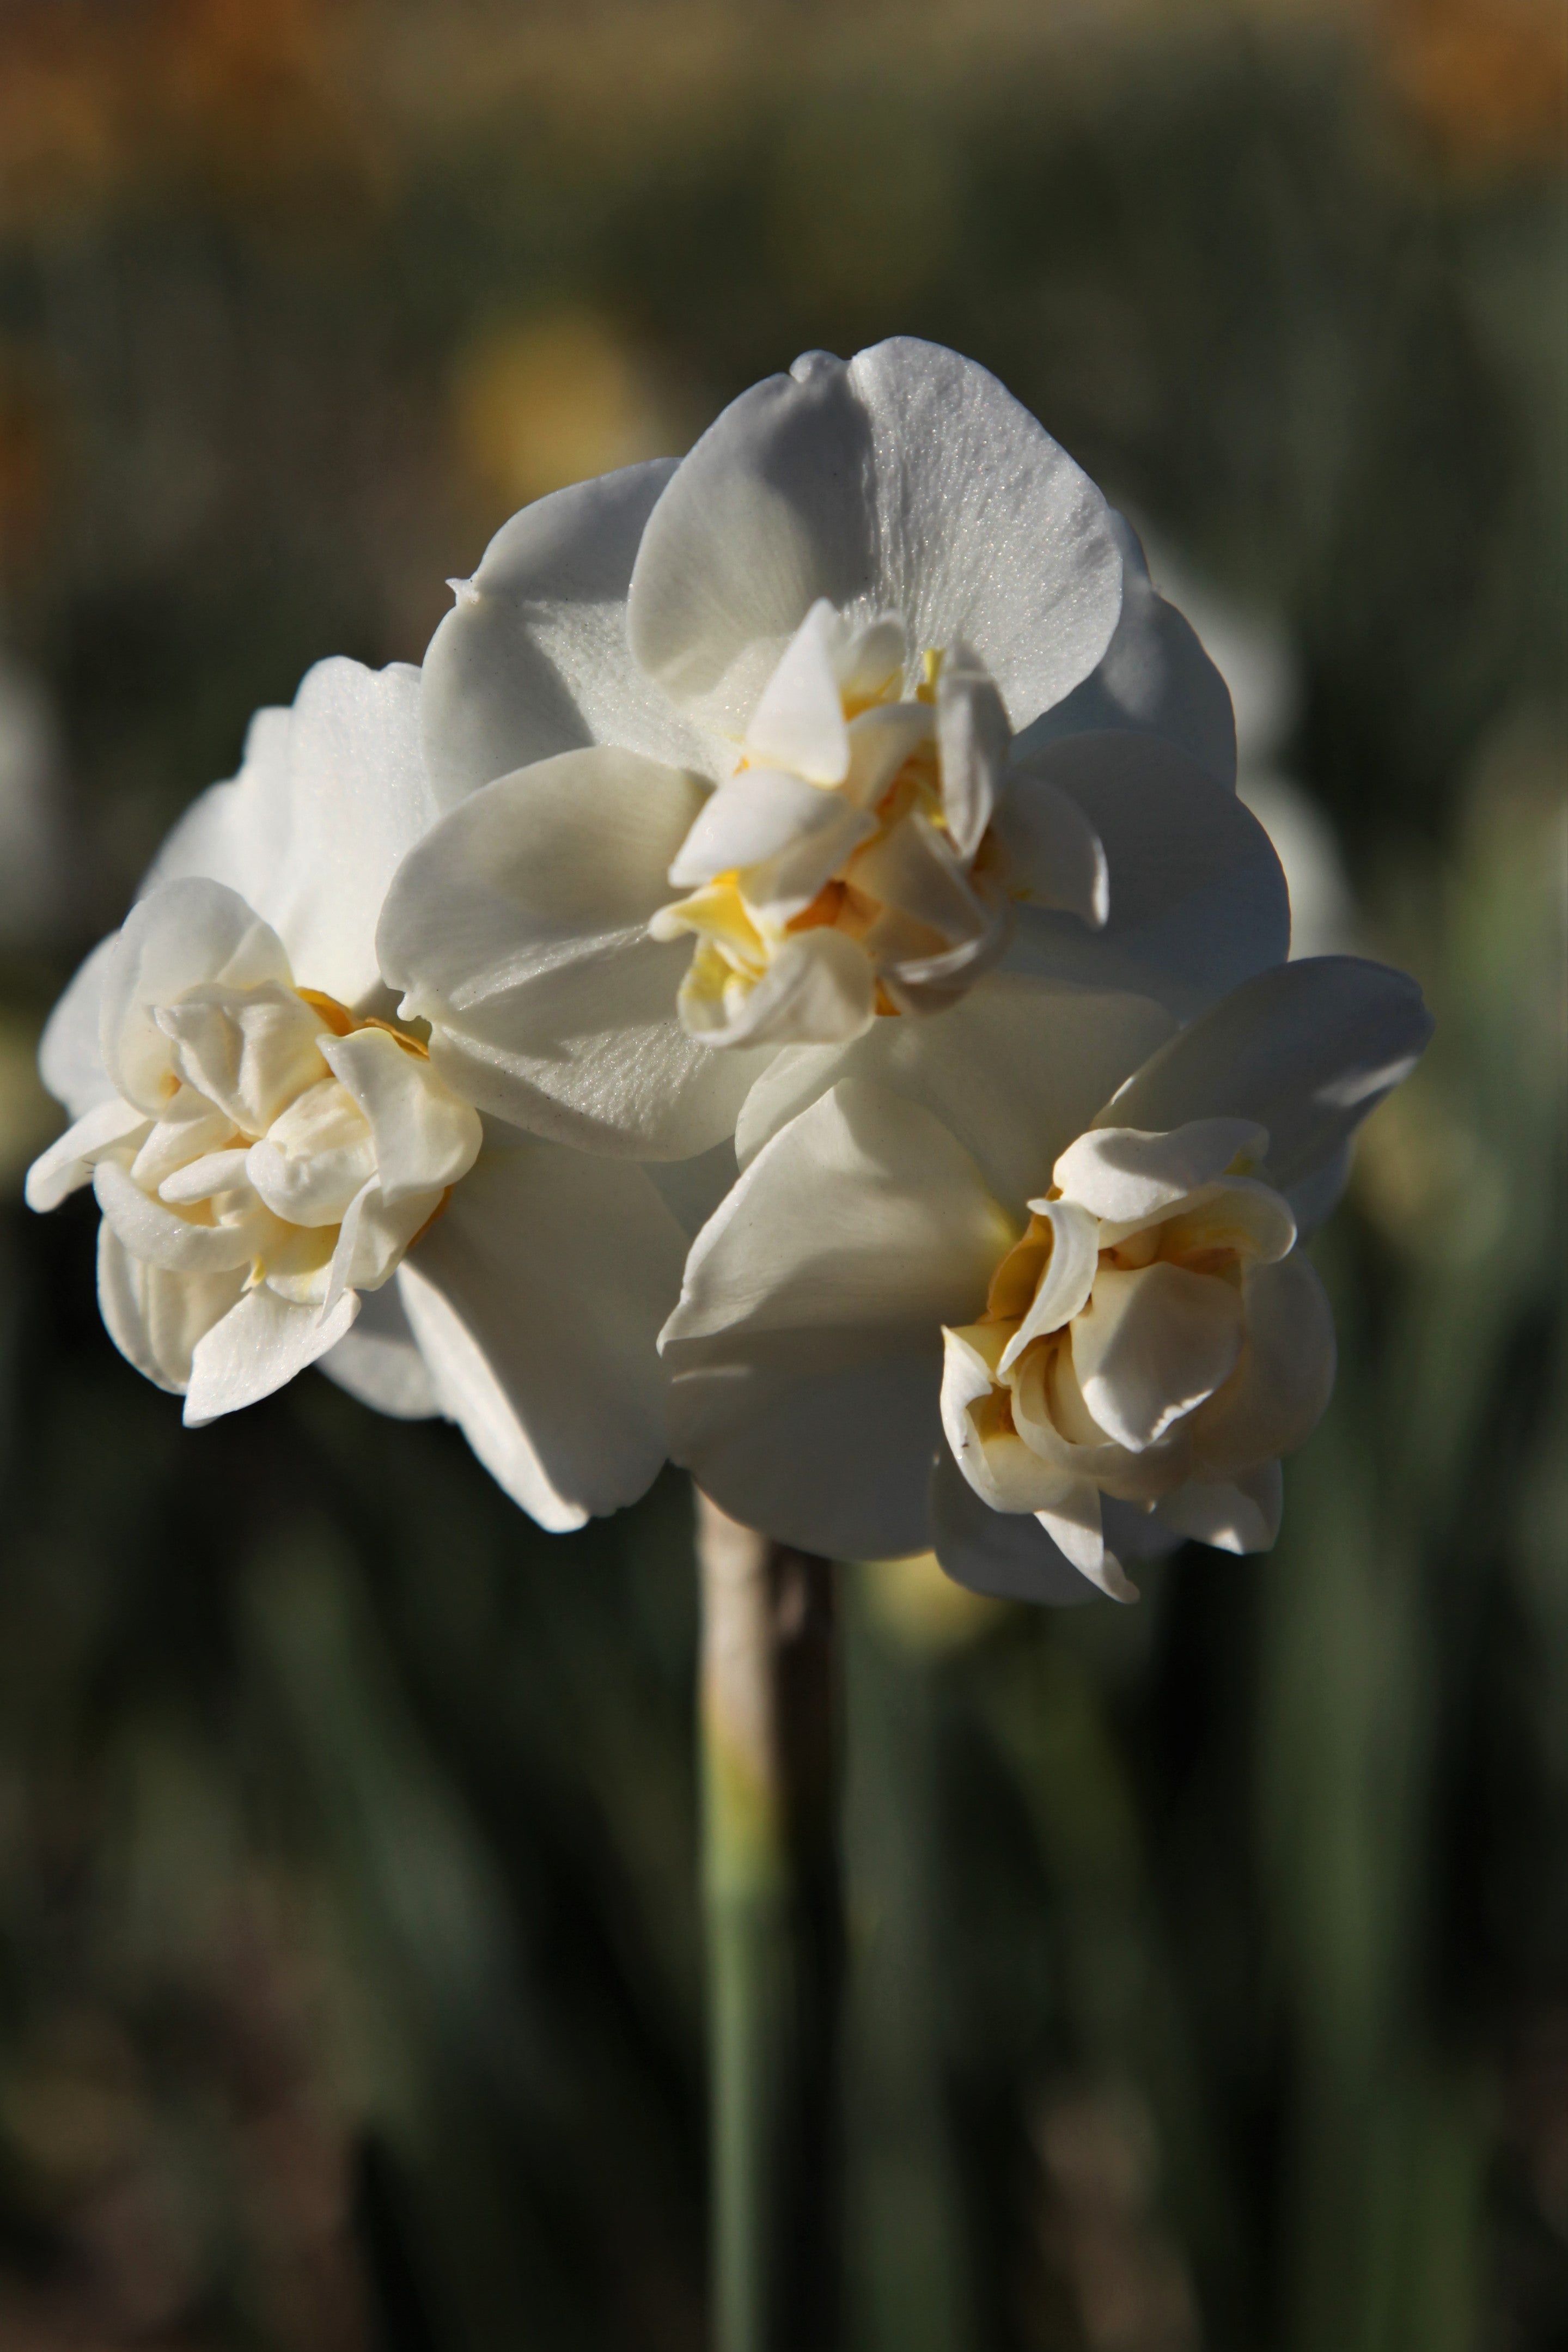 Daffodil Cheerfulness has pristine white petals and a ruffled heart